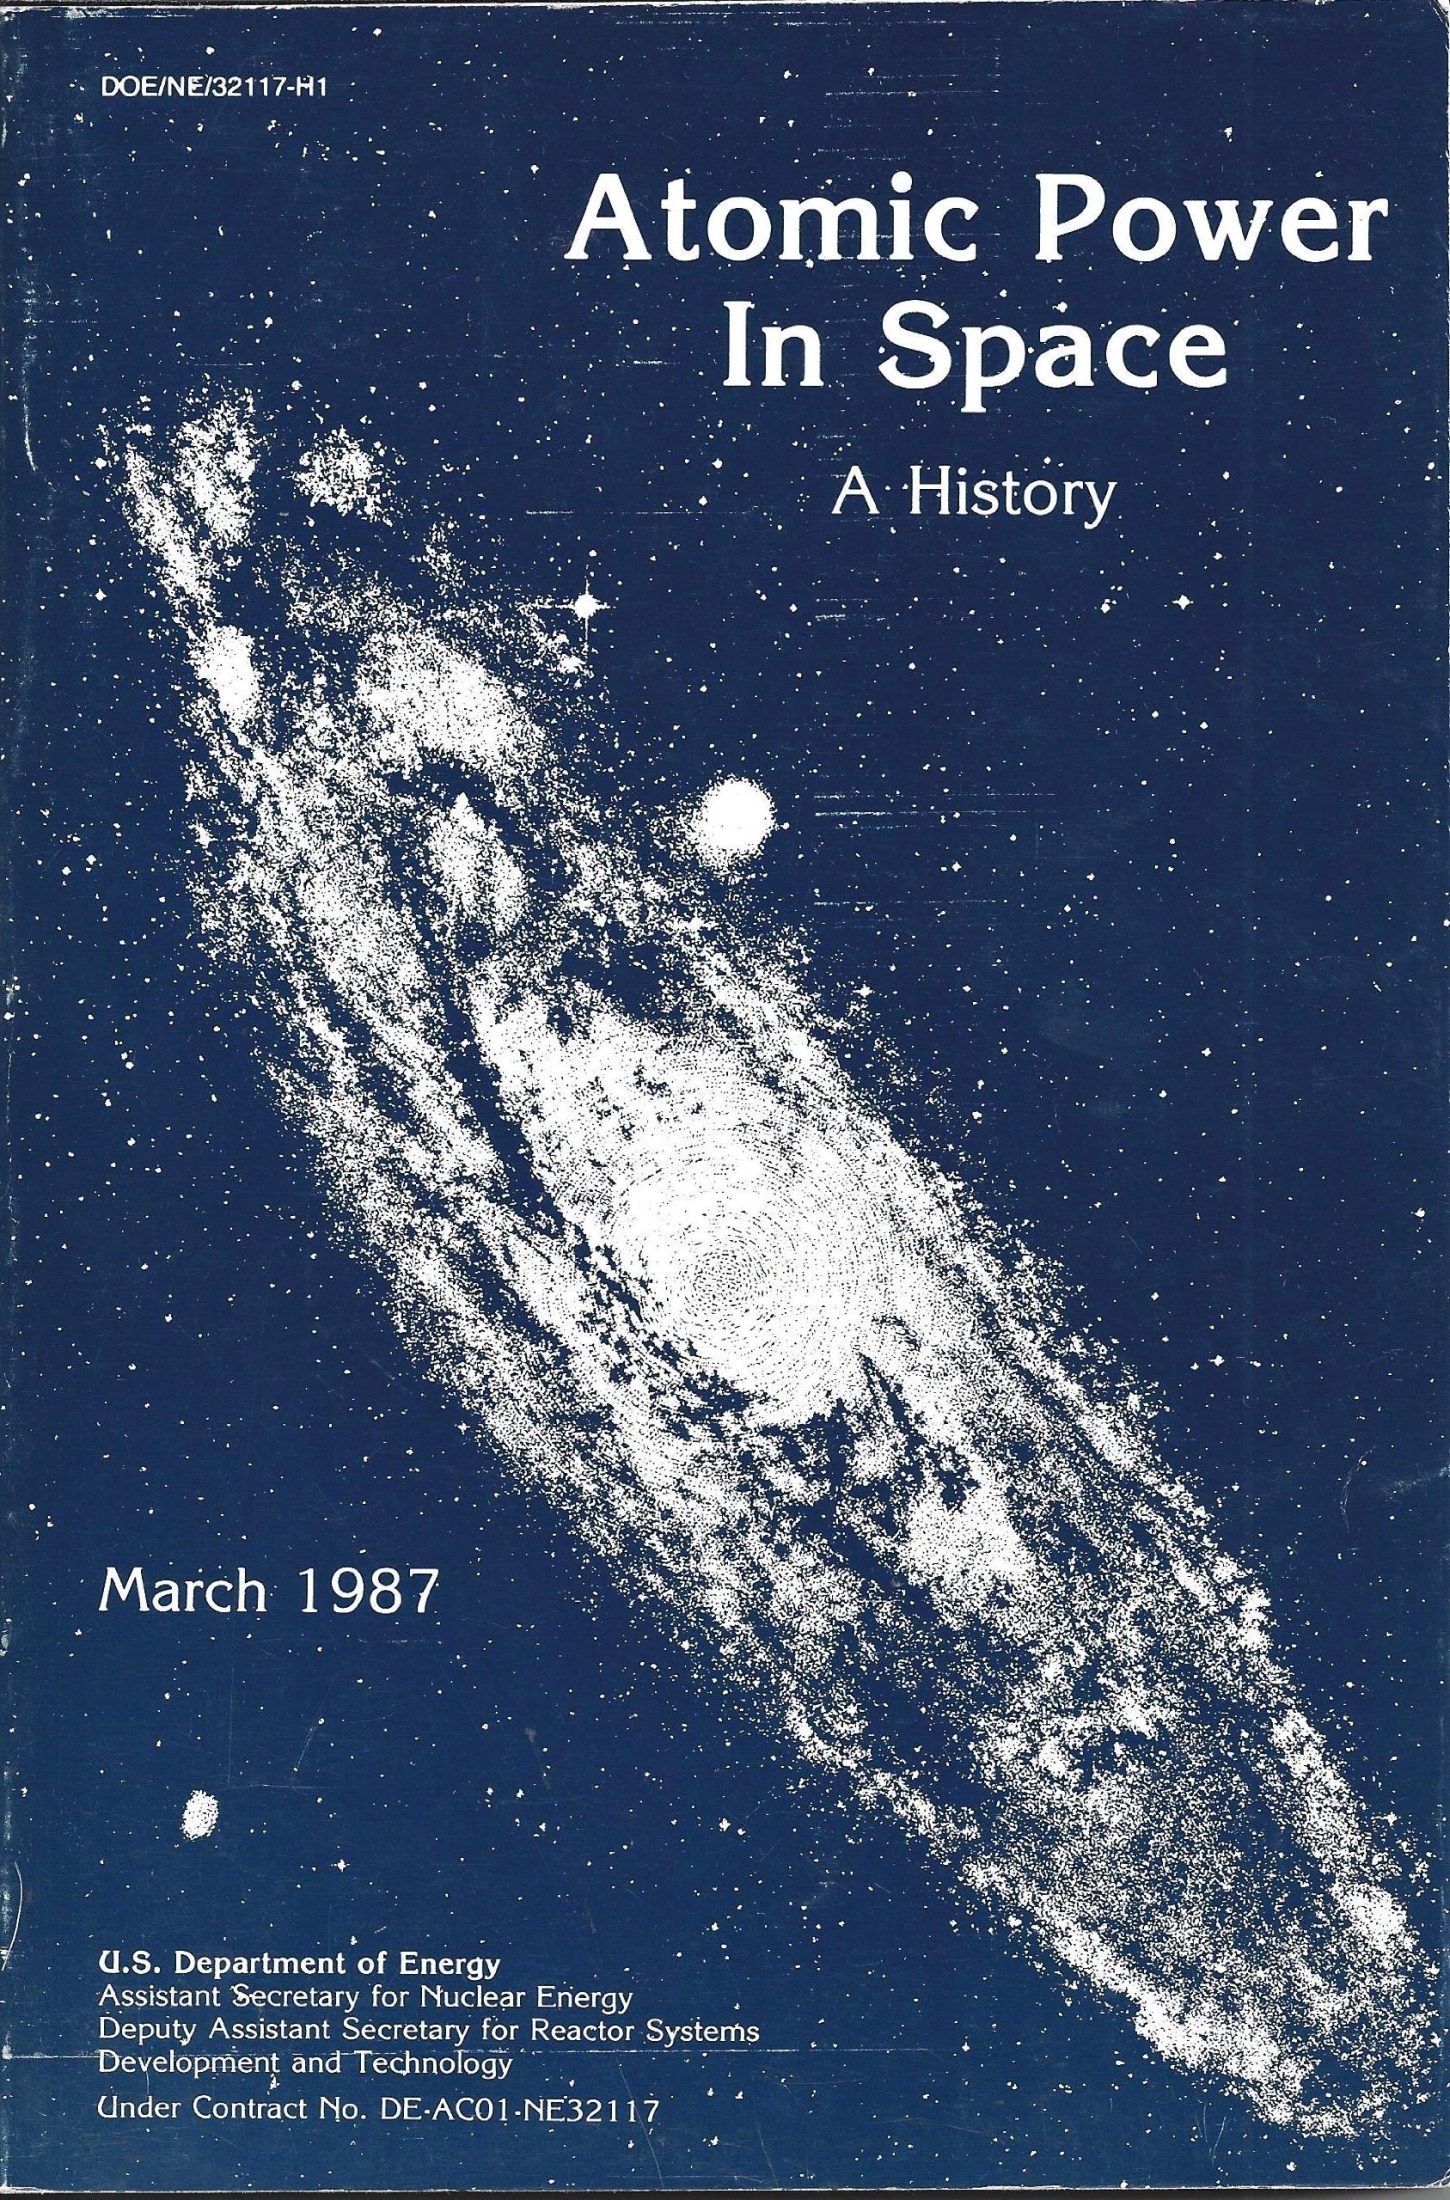 Atomic Power in Space: A History